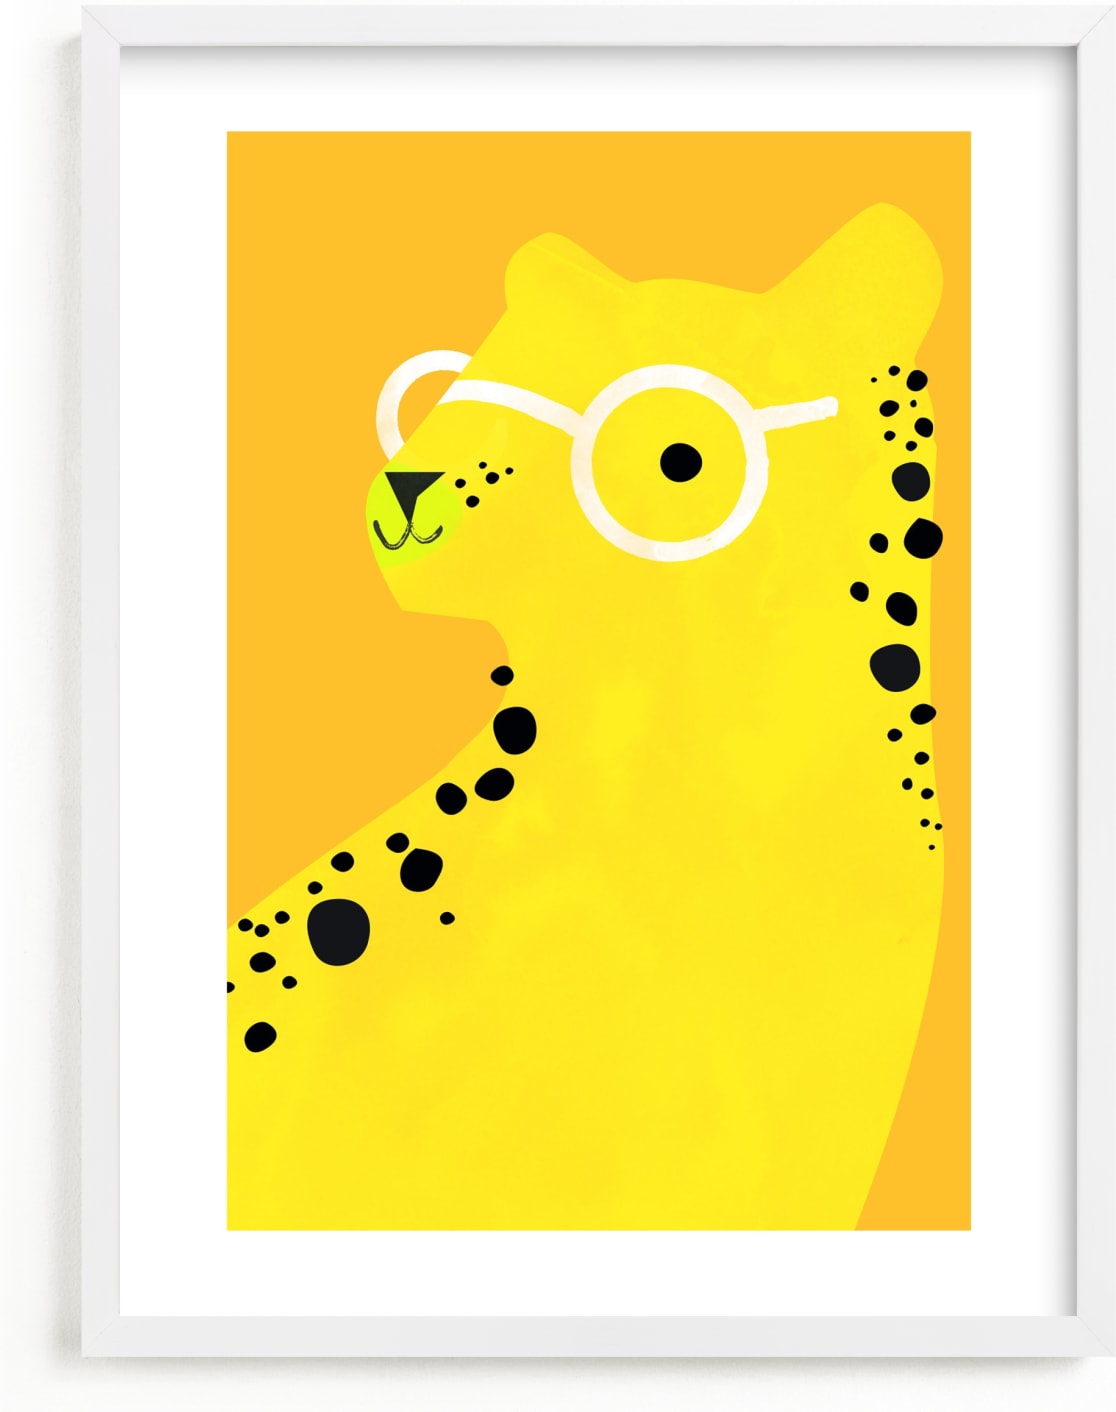 This is a yellow kids wall art by Lori Wemple called Cheetah.